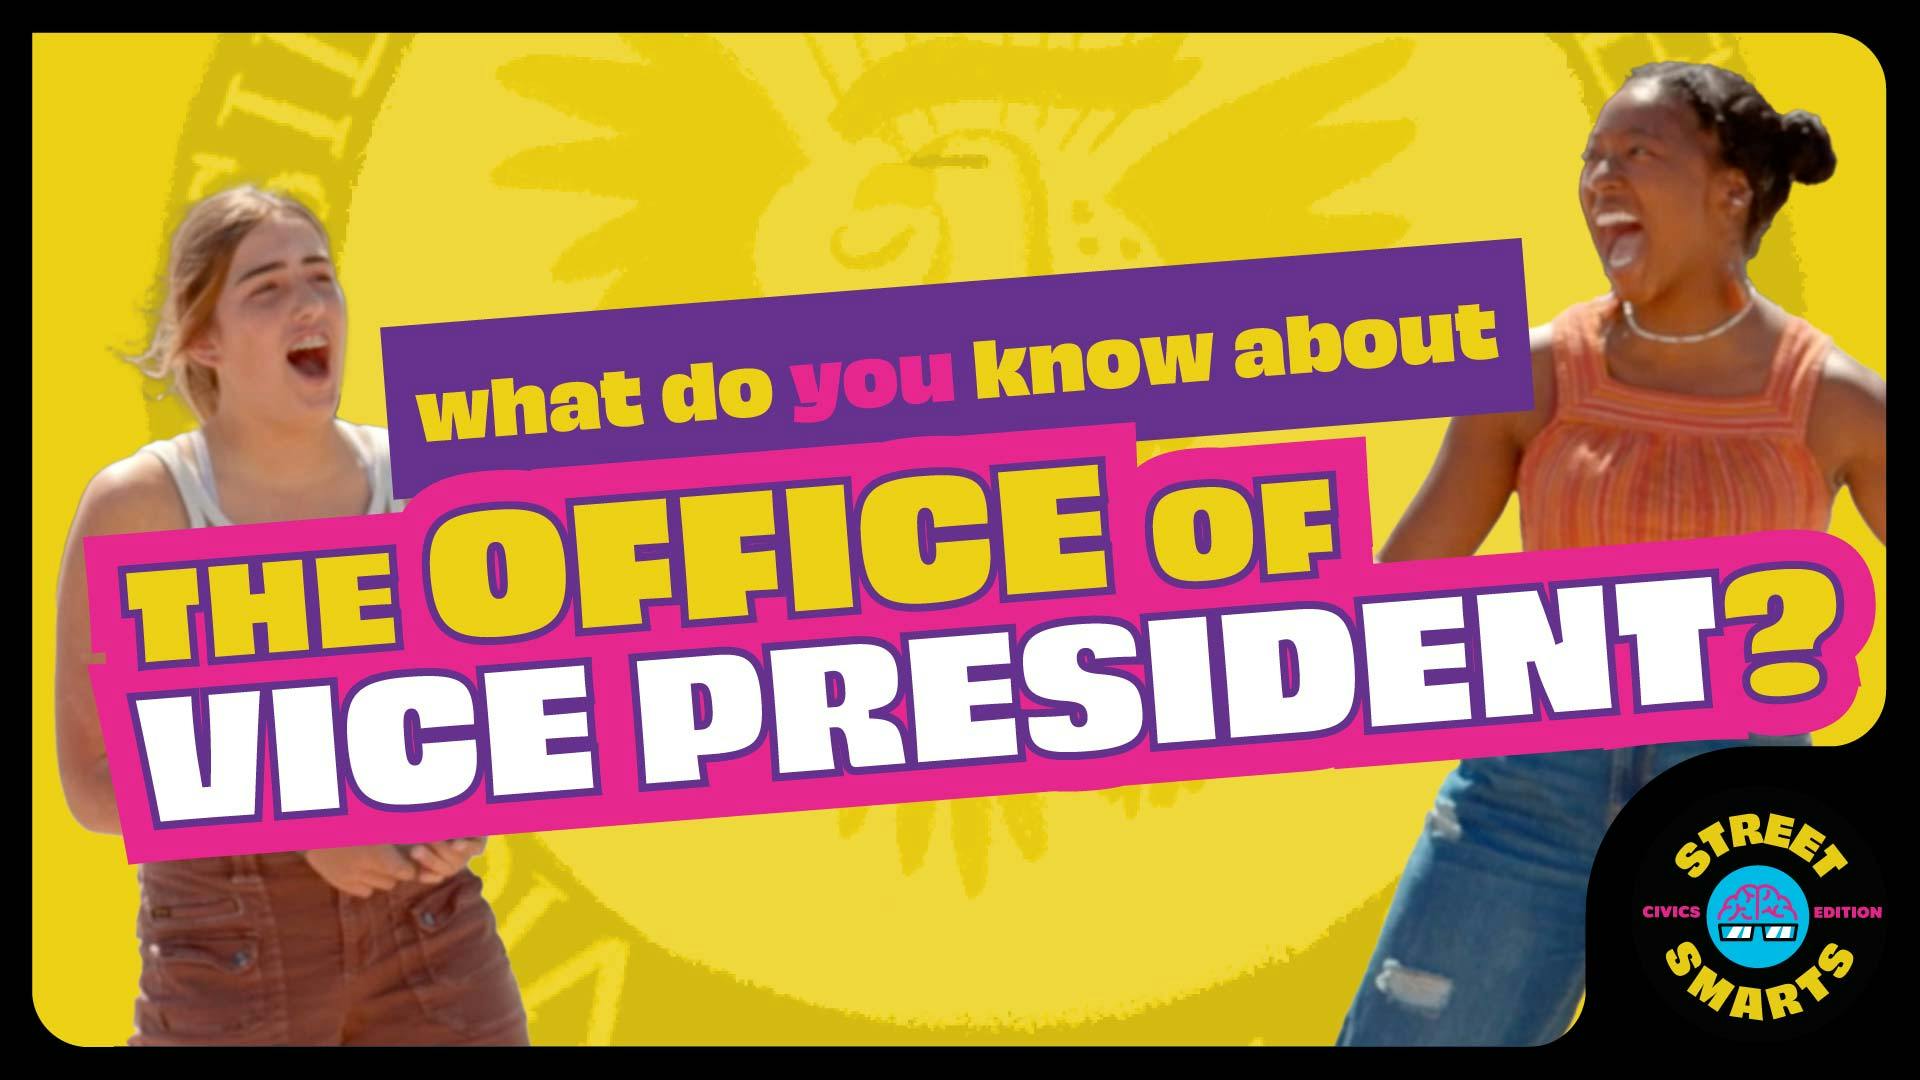 Street Smarts: The Office of Vice President